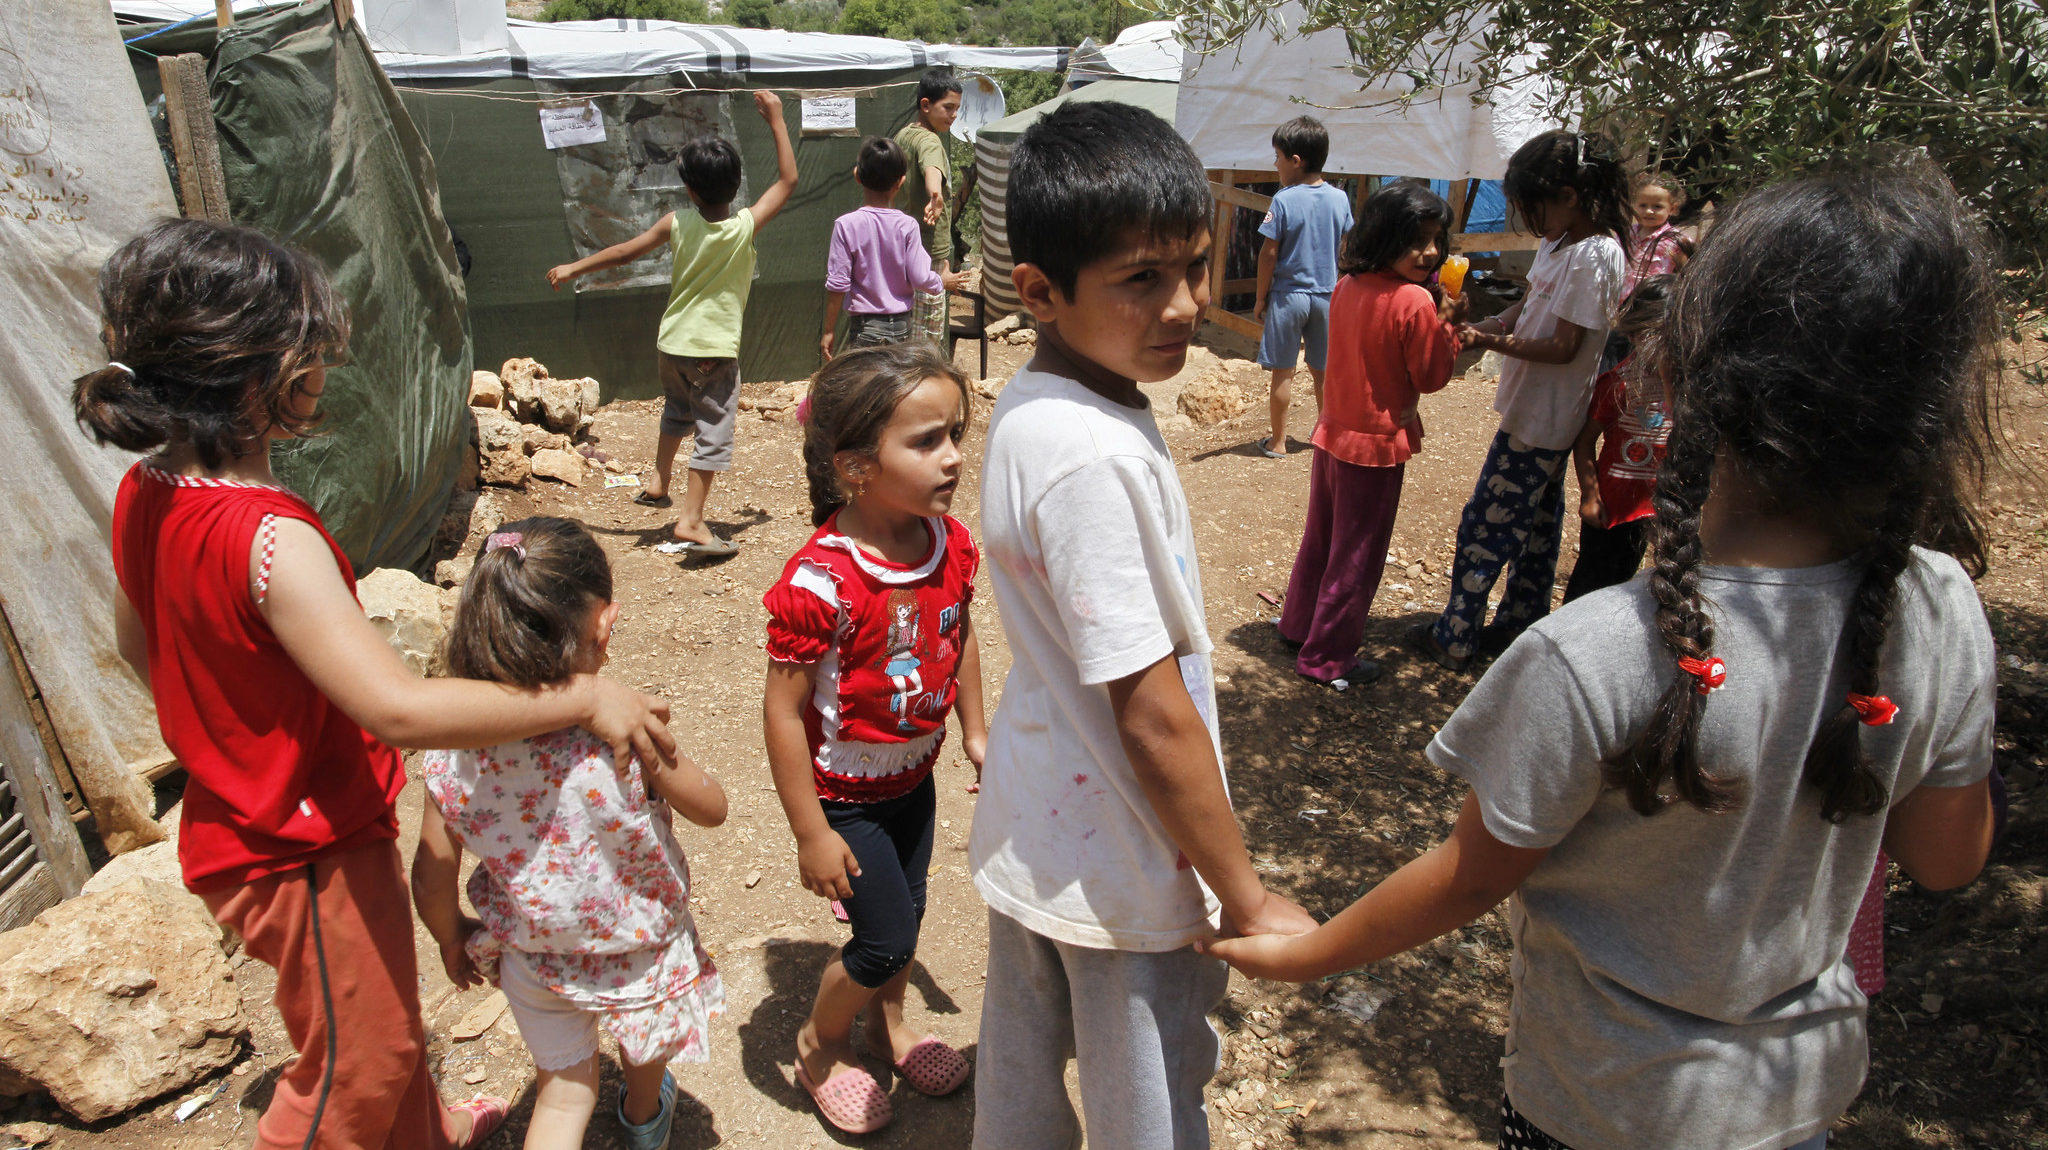 Lebanon Tightens Regulations on Syrian Refugees Amid Tensions